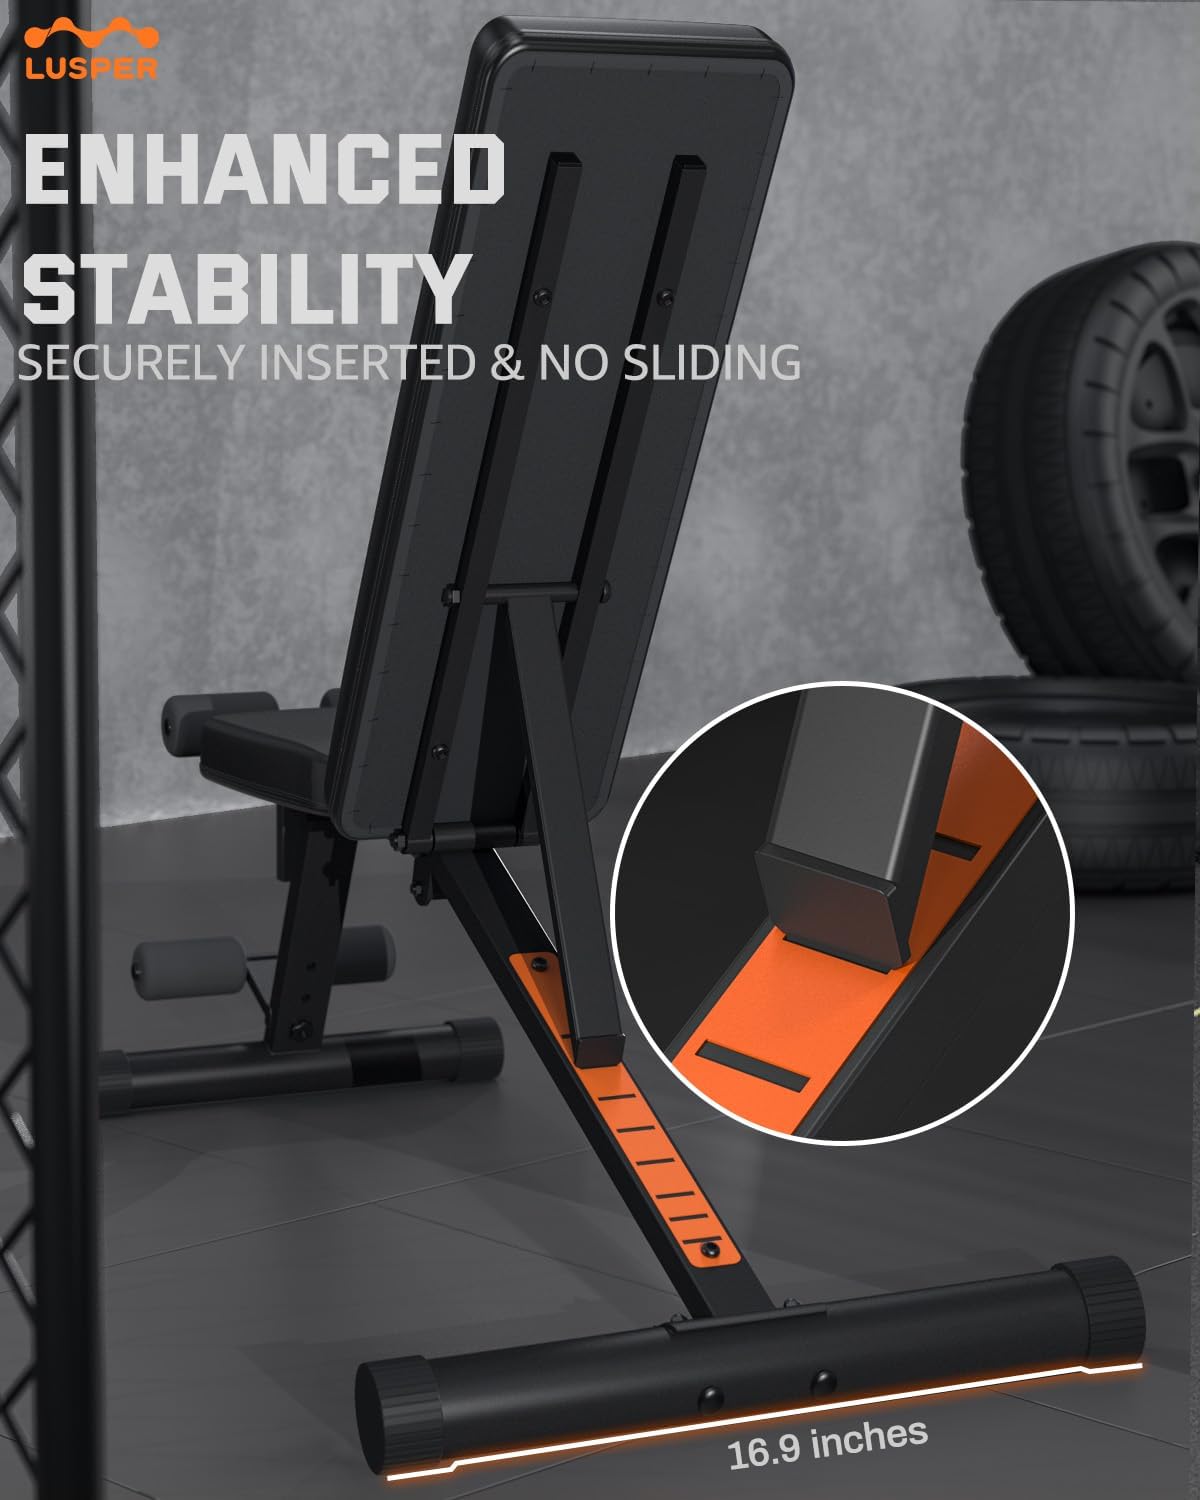 Lusper Adjustable Weight Bench For Home, Extended Headrest, Heavy Weight Capacity, 3 Sec Fast Folding Workout Bench for Decline Incline Bench Press